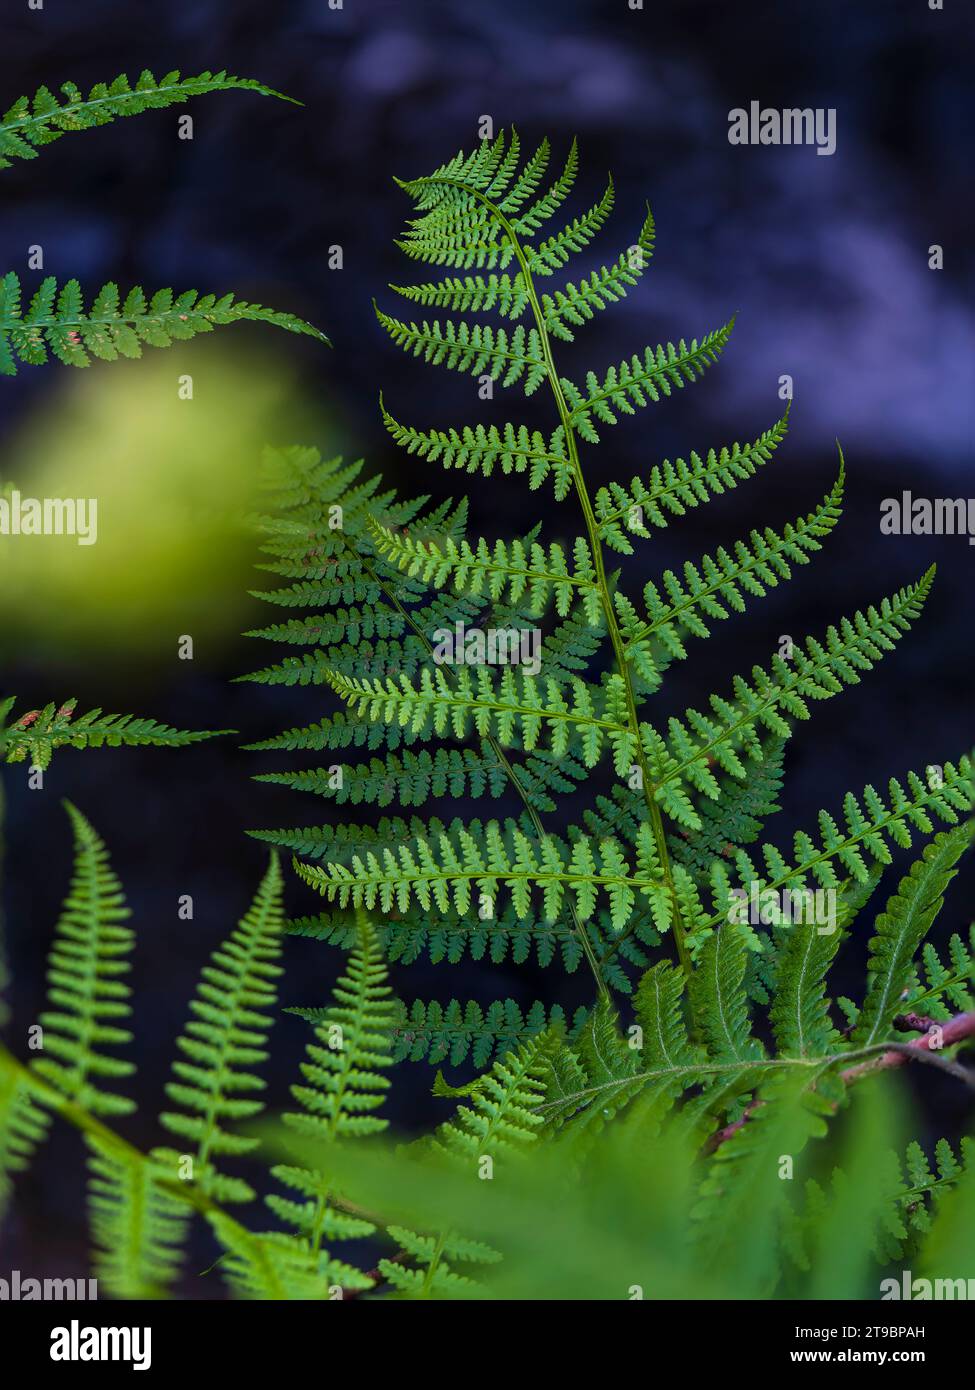 View of green fern leaves Stock Photo